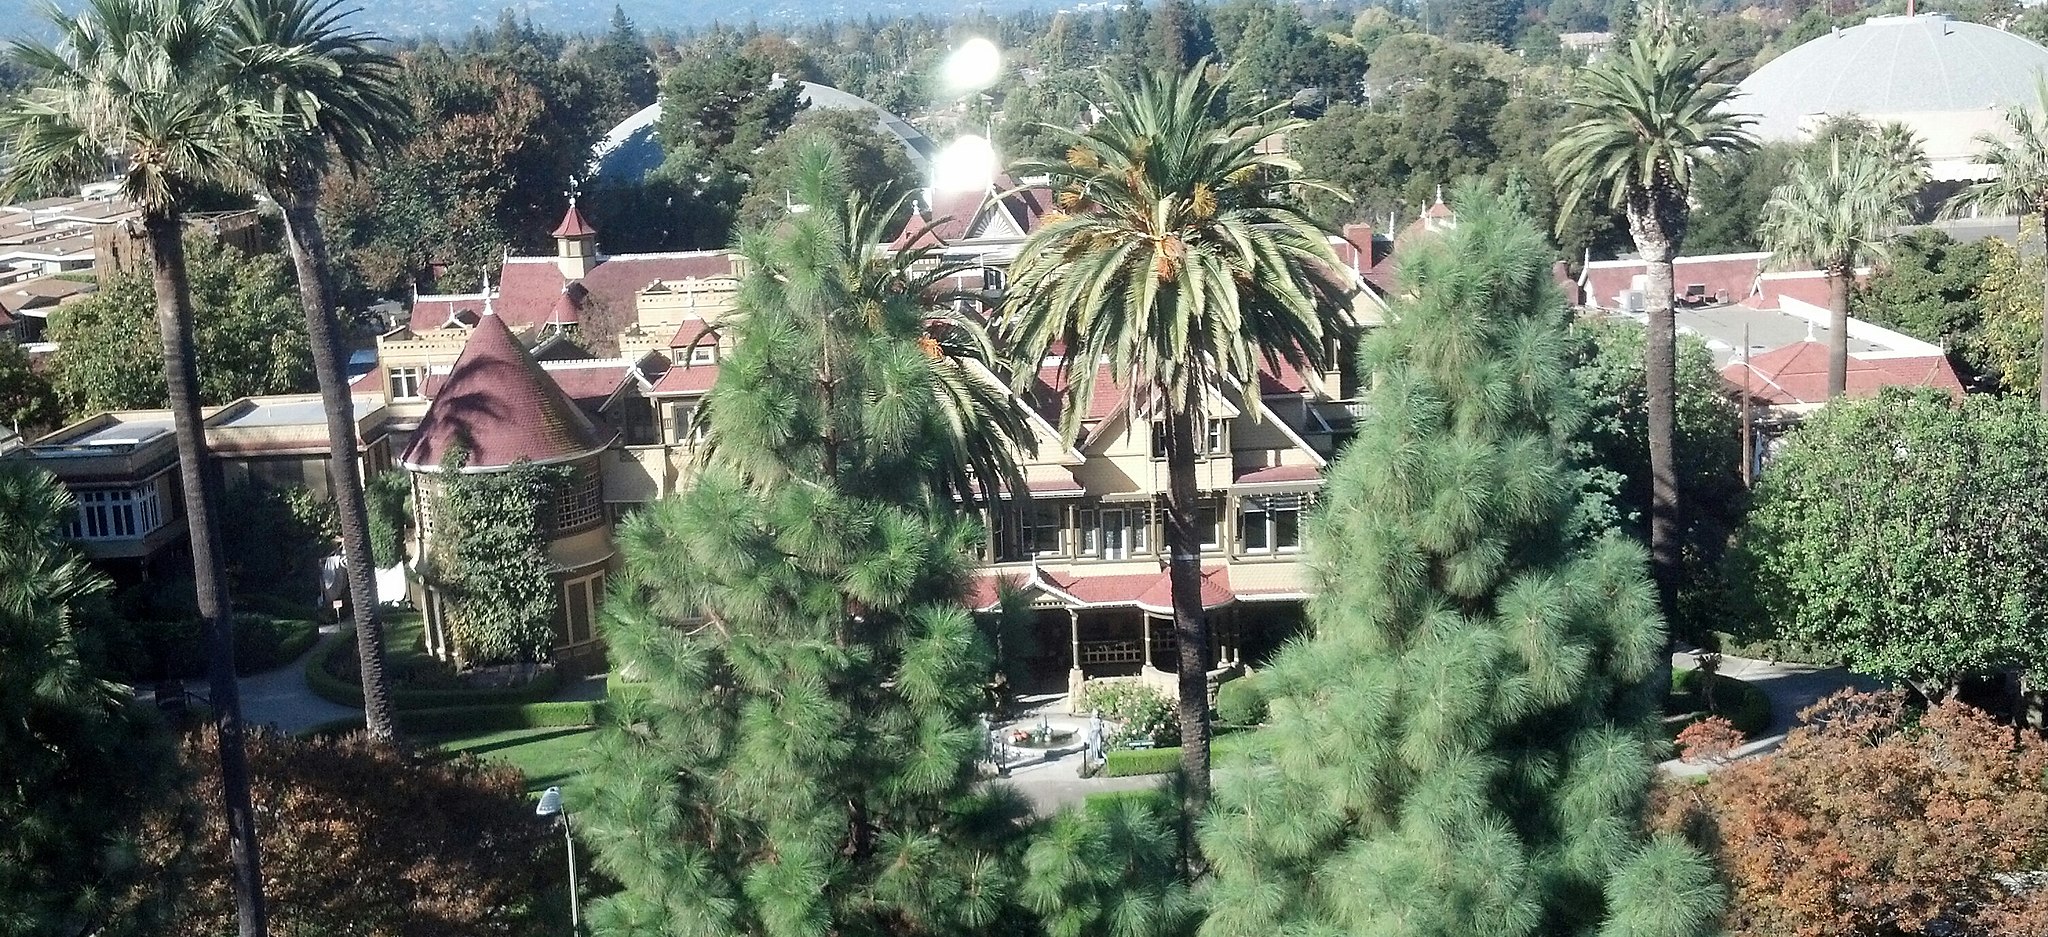 The Winchester Mansion in San Jose, California seen from above